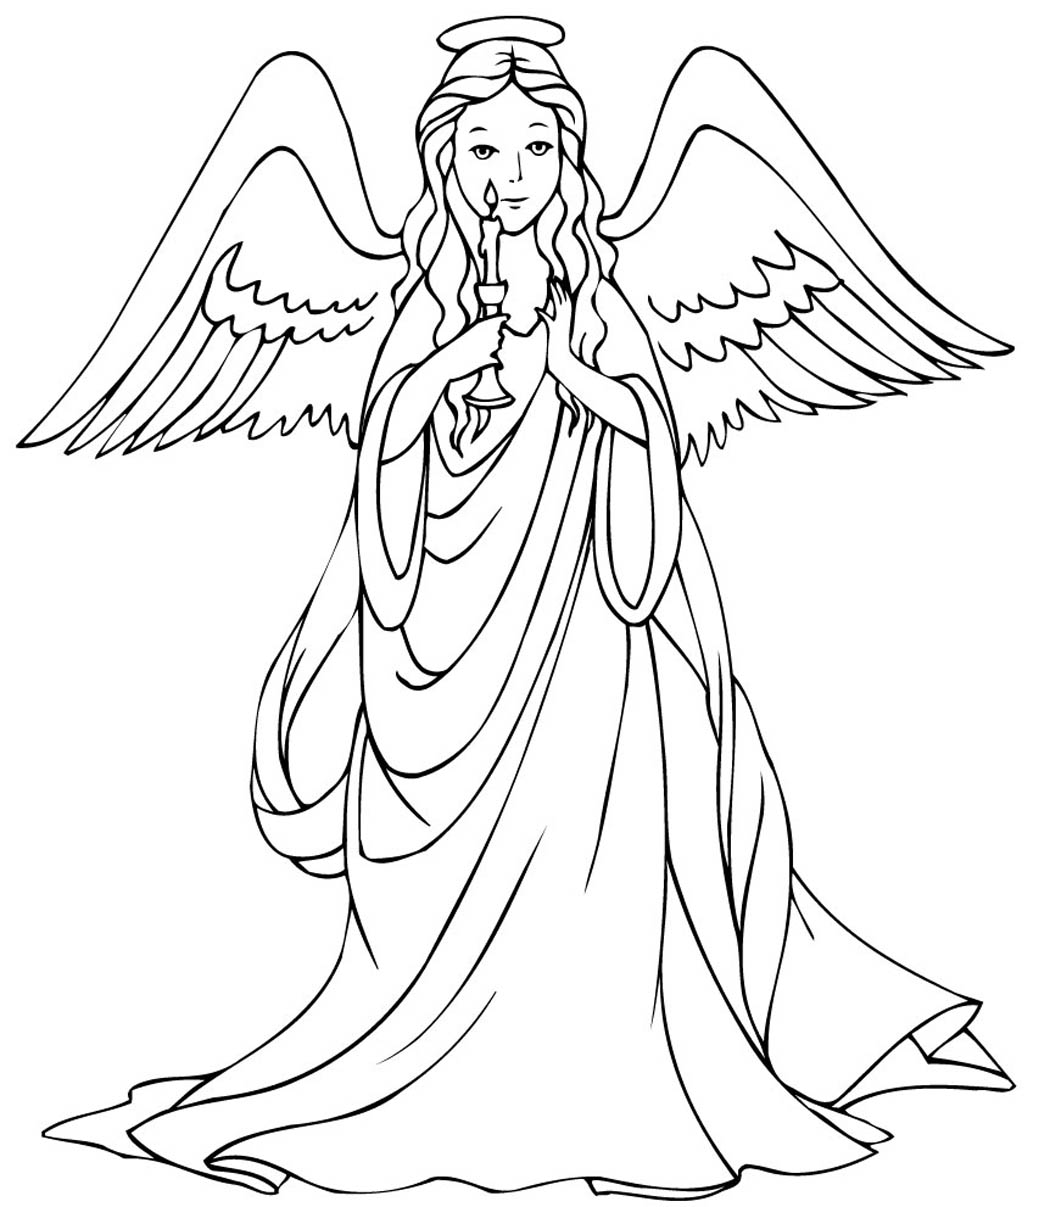 get-this-free-printable-angel-coloring-pages-for-adults-34c78